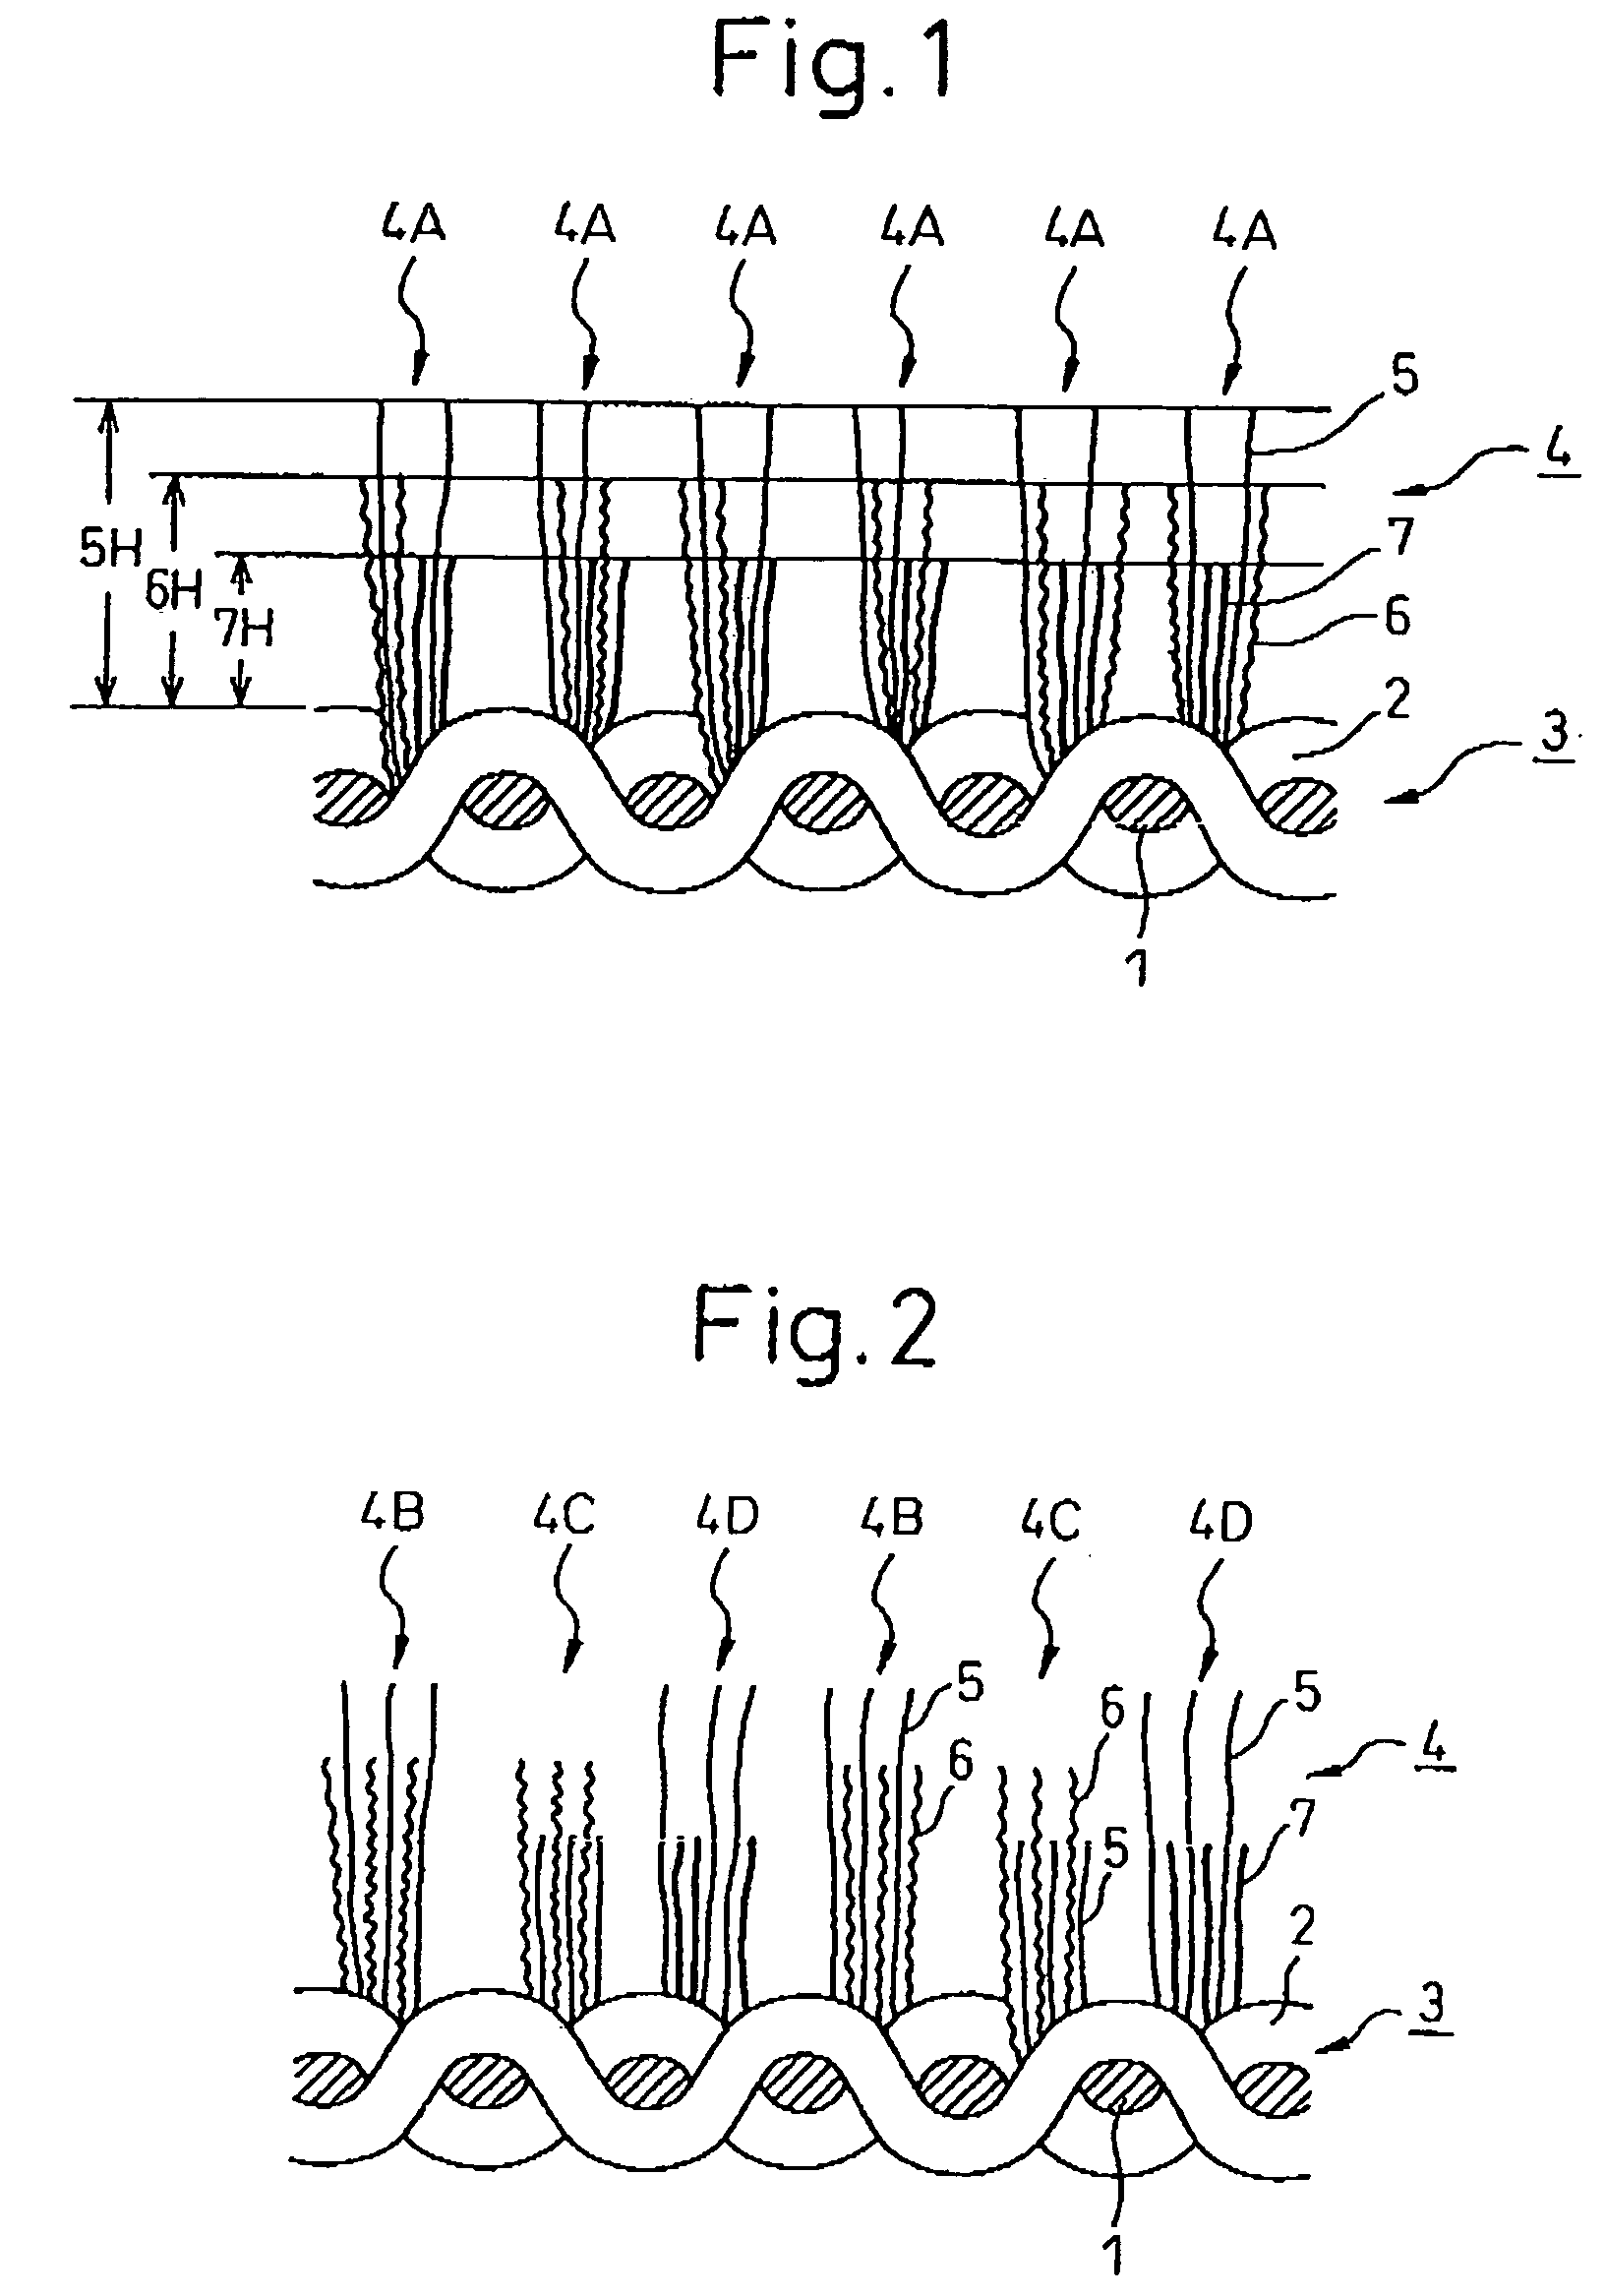 Concave and convex-patterned multi-colored fiber pile fabric